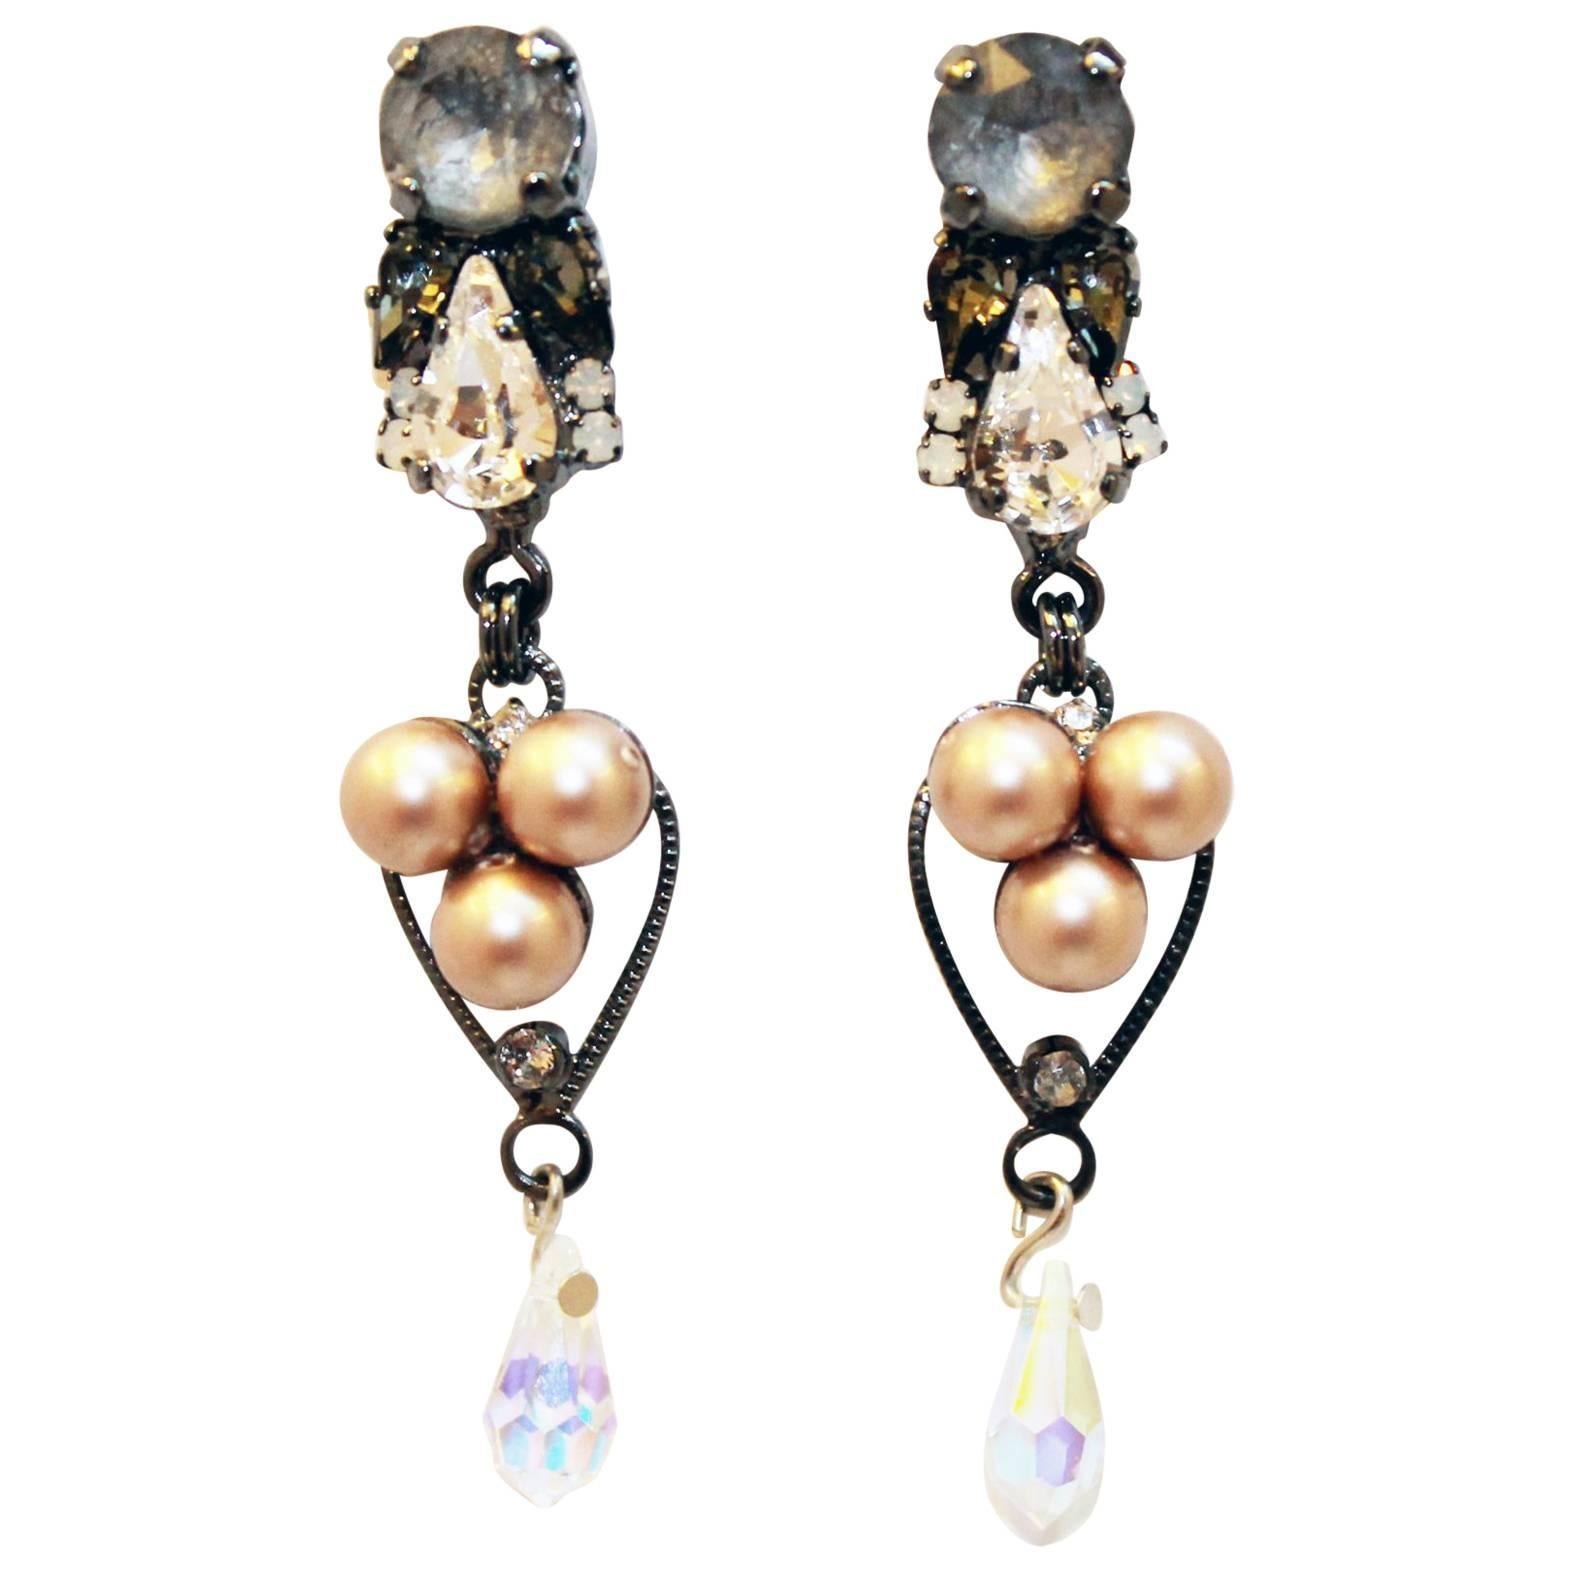 Delicate Swarovski Crystal and Metallic Blush Pink Faux Pearl Drop Earrings For Sale